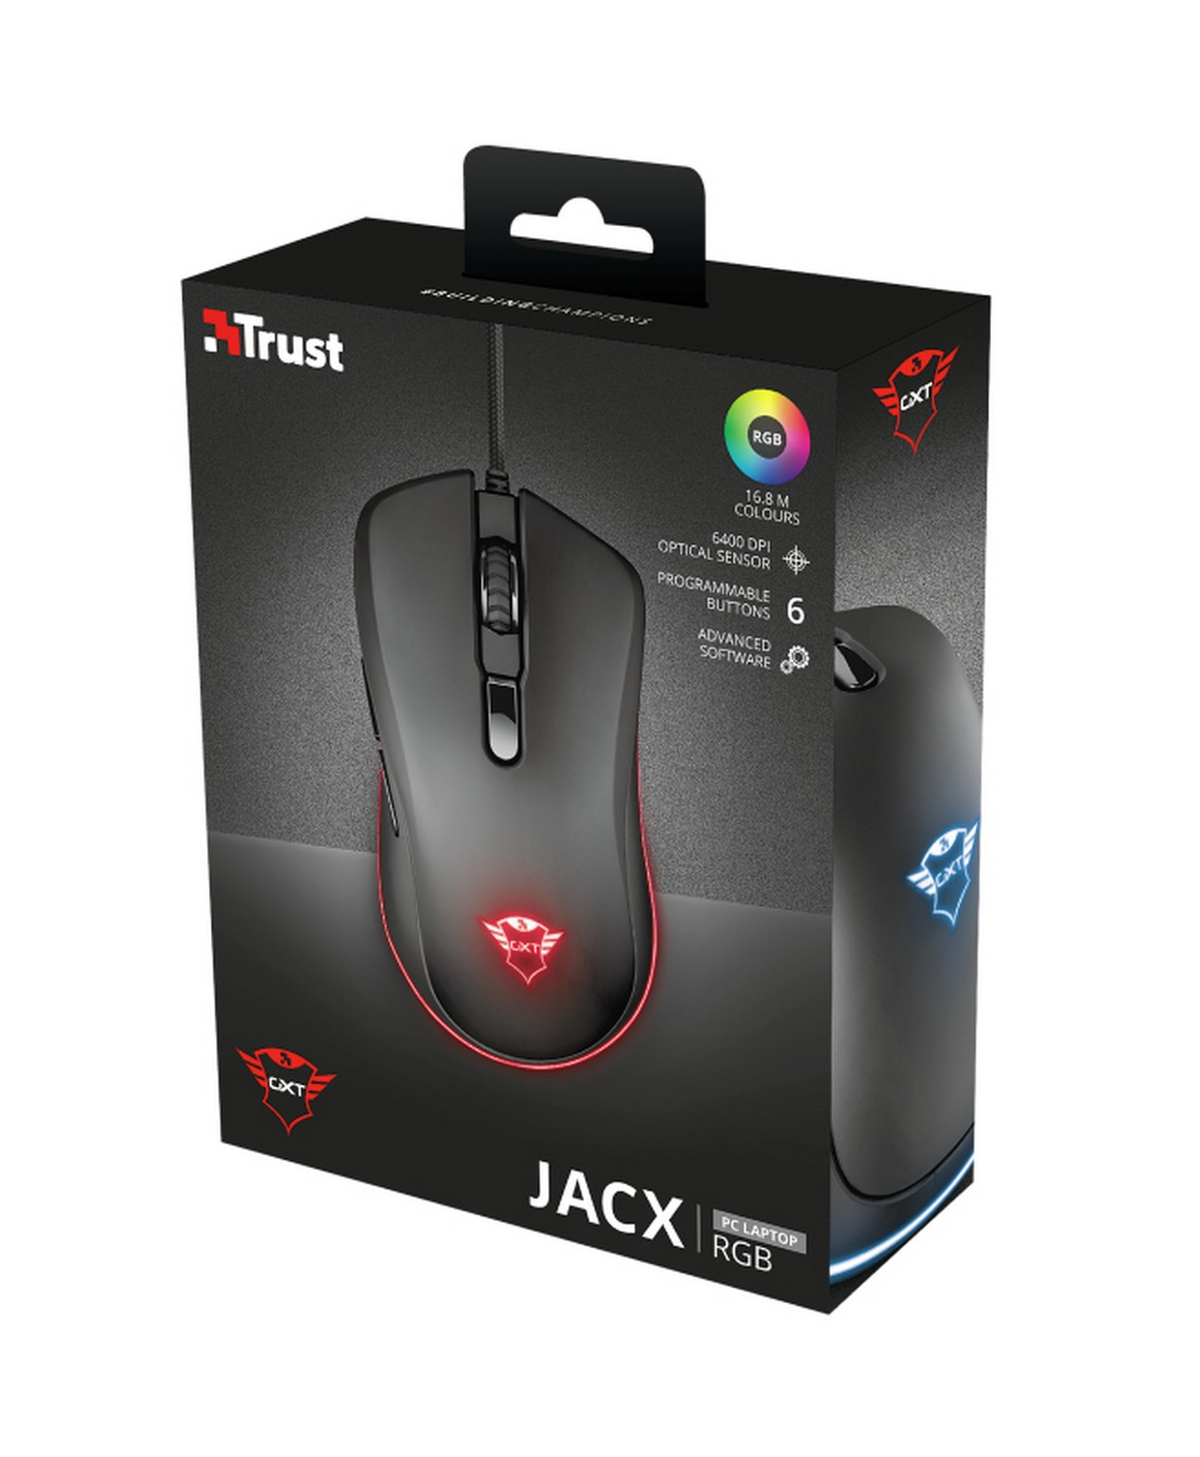 TRUST 23575 GXT 930 RGB Schwarz Gaming Maus, GAMING MOUSE JACX